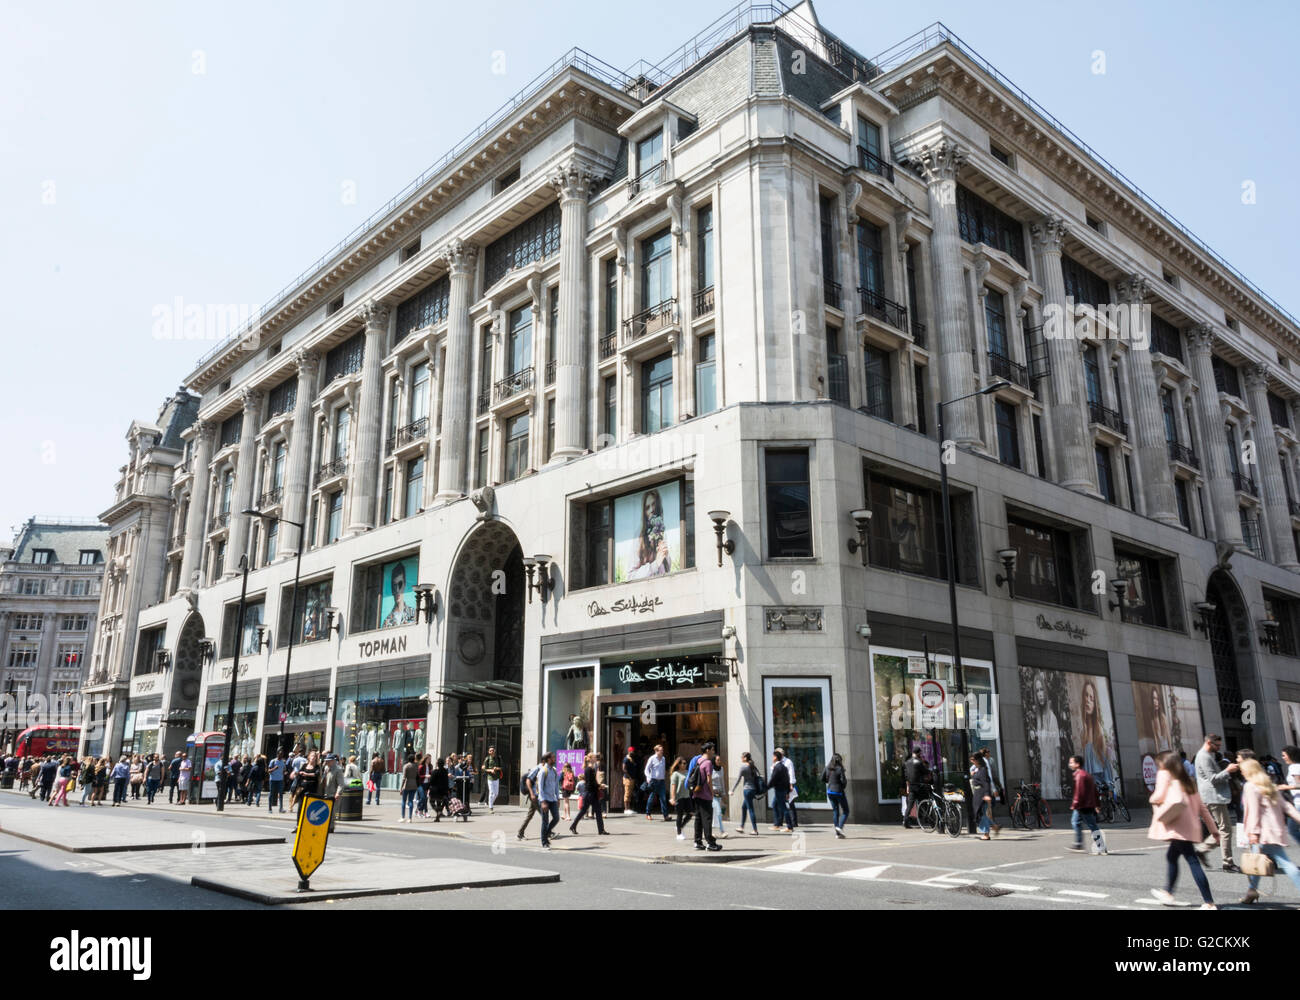 Topshop Oxford Street High Resolution Stock Photography and Images - Alamy